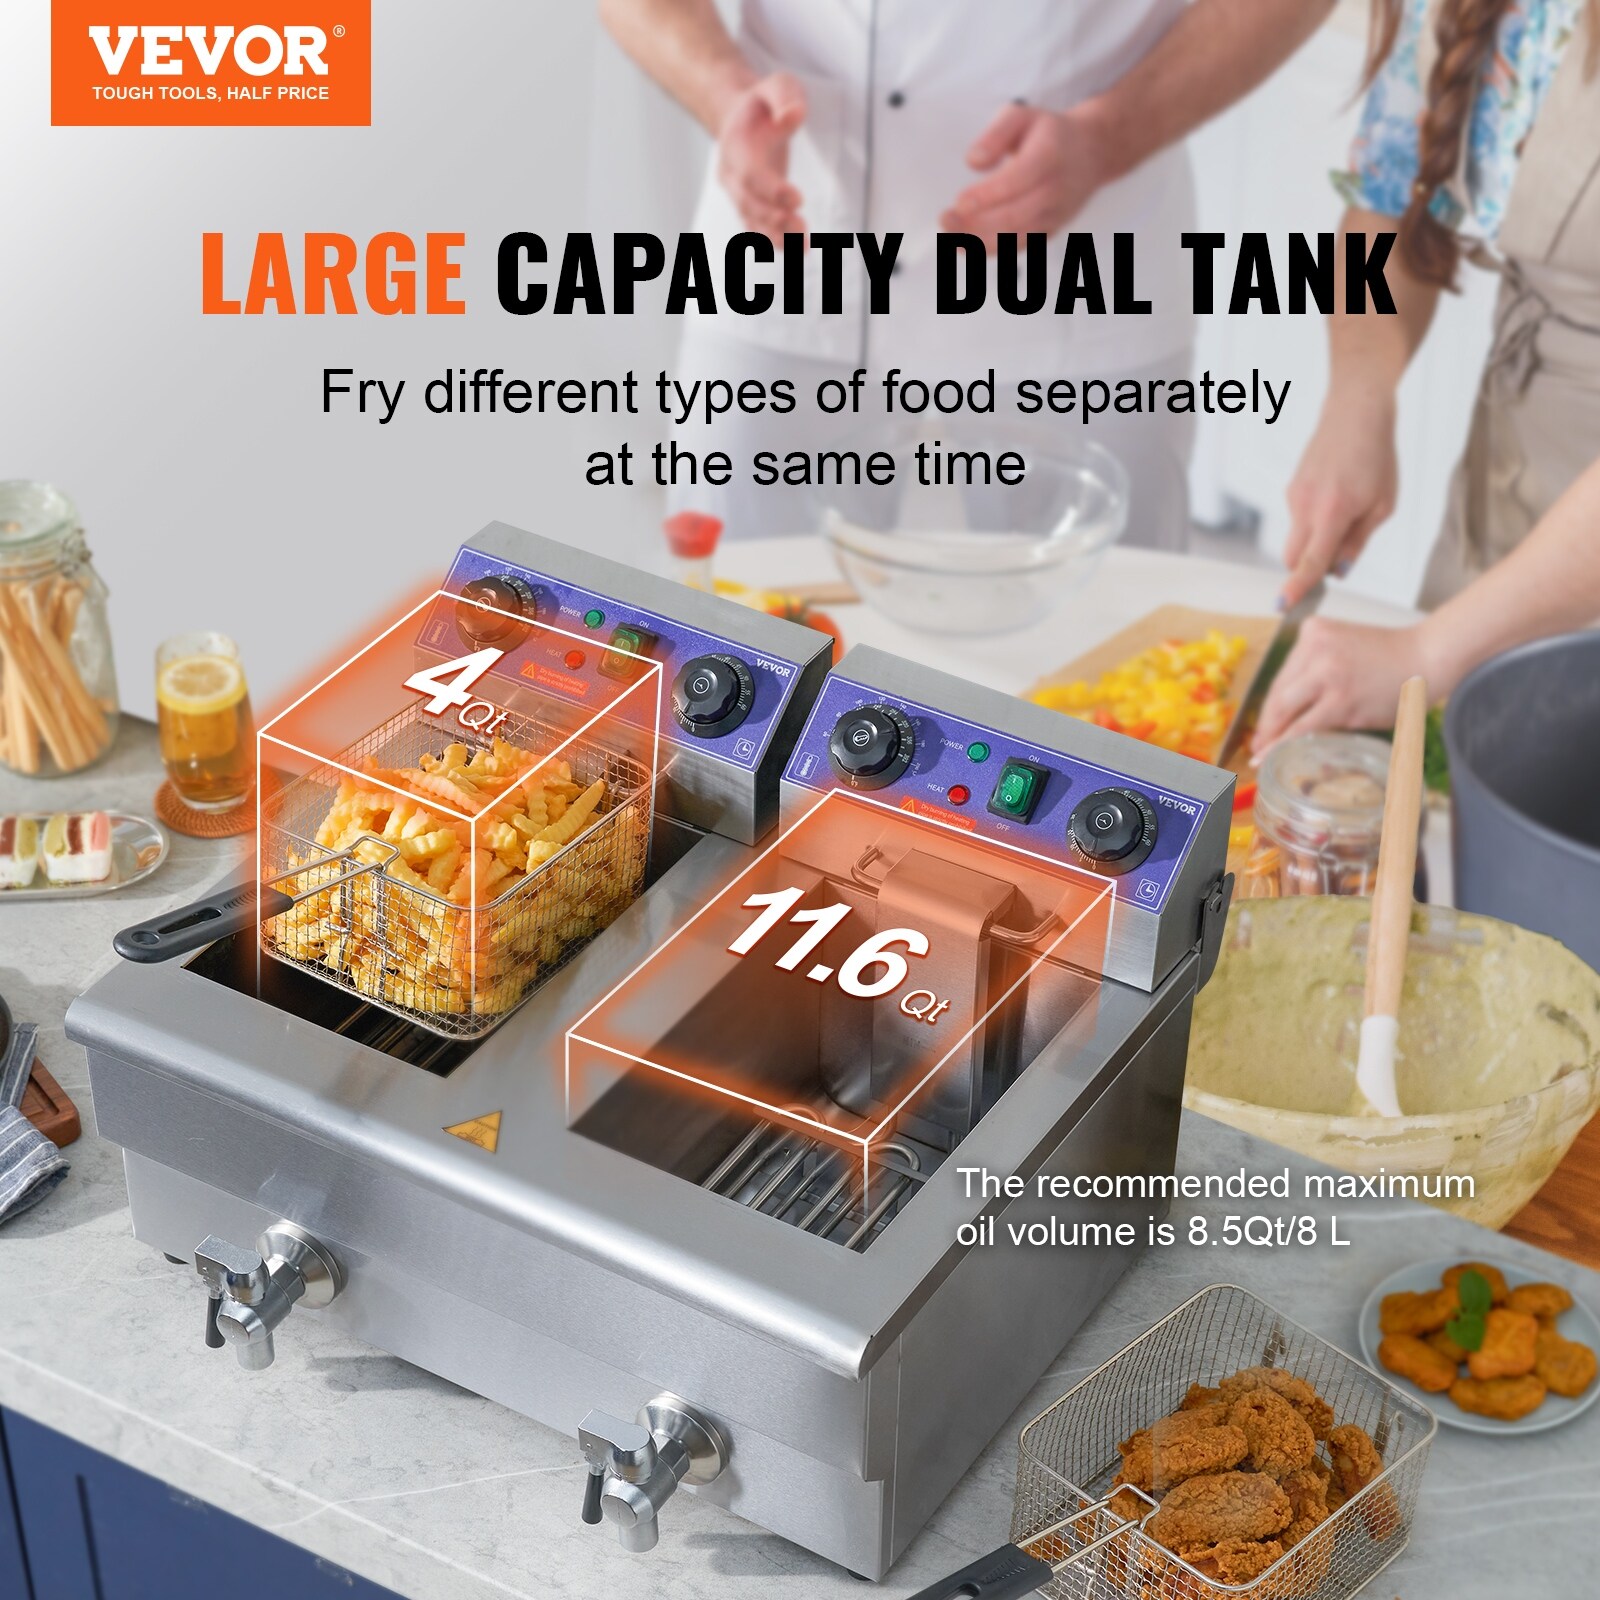 https://ak1.ostkcdn.com/images/products/is/images/direct/293c7dceec072f9677e7f3f1624661d16da81762/VEVOR-Commercial-Electric-Deep-Fryer-24L-3000W-Dual-Basket-Stainless-Steel-Countertop-with-Time-Control-%26-Oil-Filtration.jpg